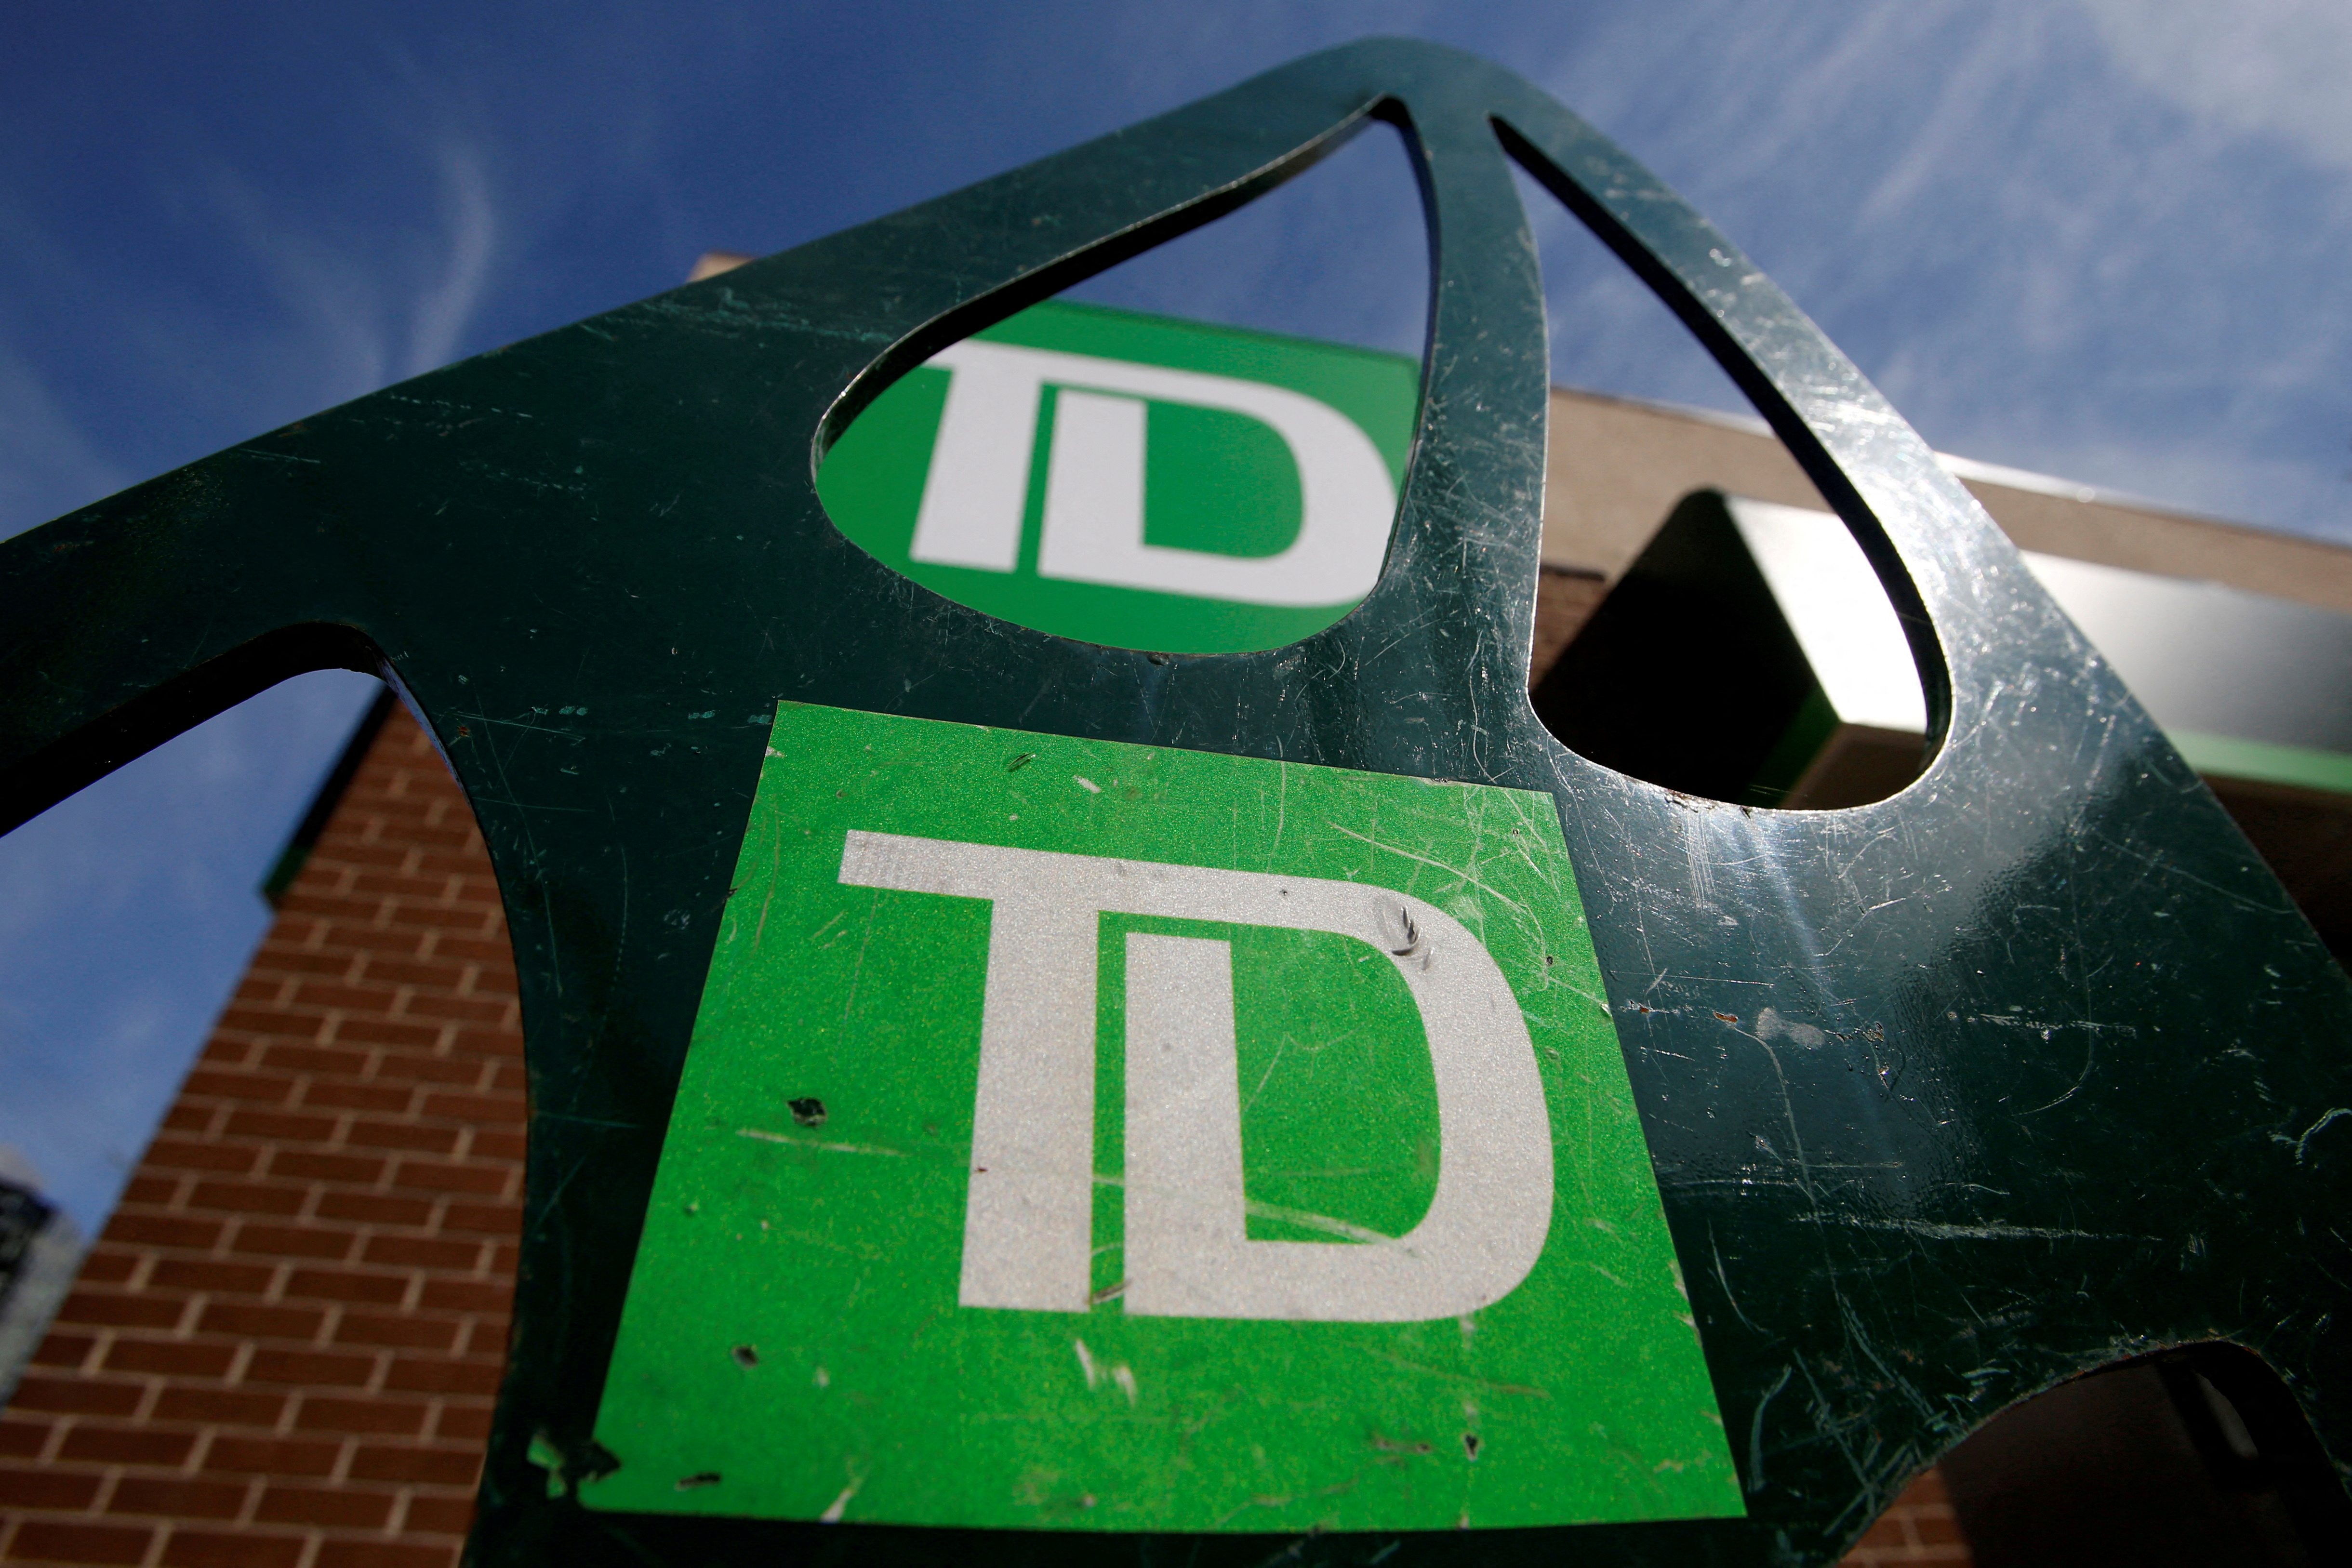 Toronto-Dominion Bank logos are seen outside of a branch in Ottawa